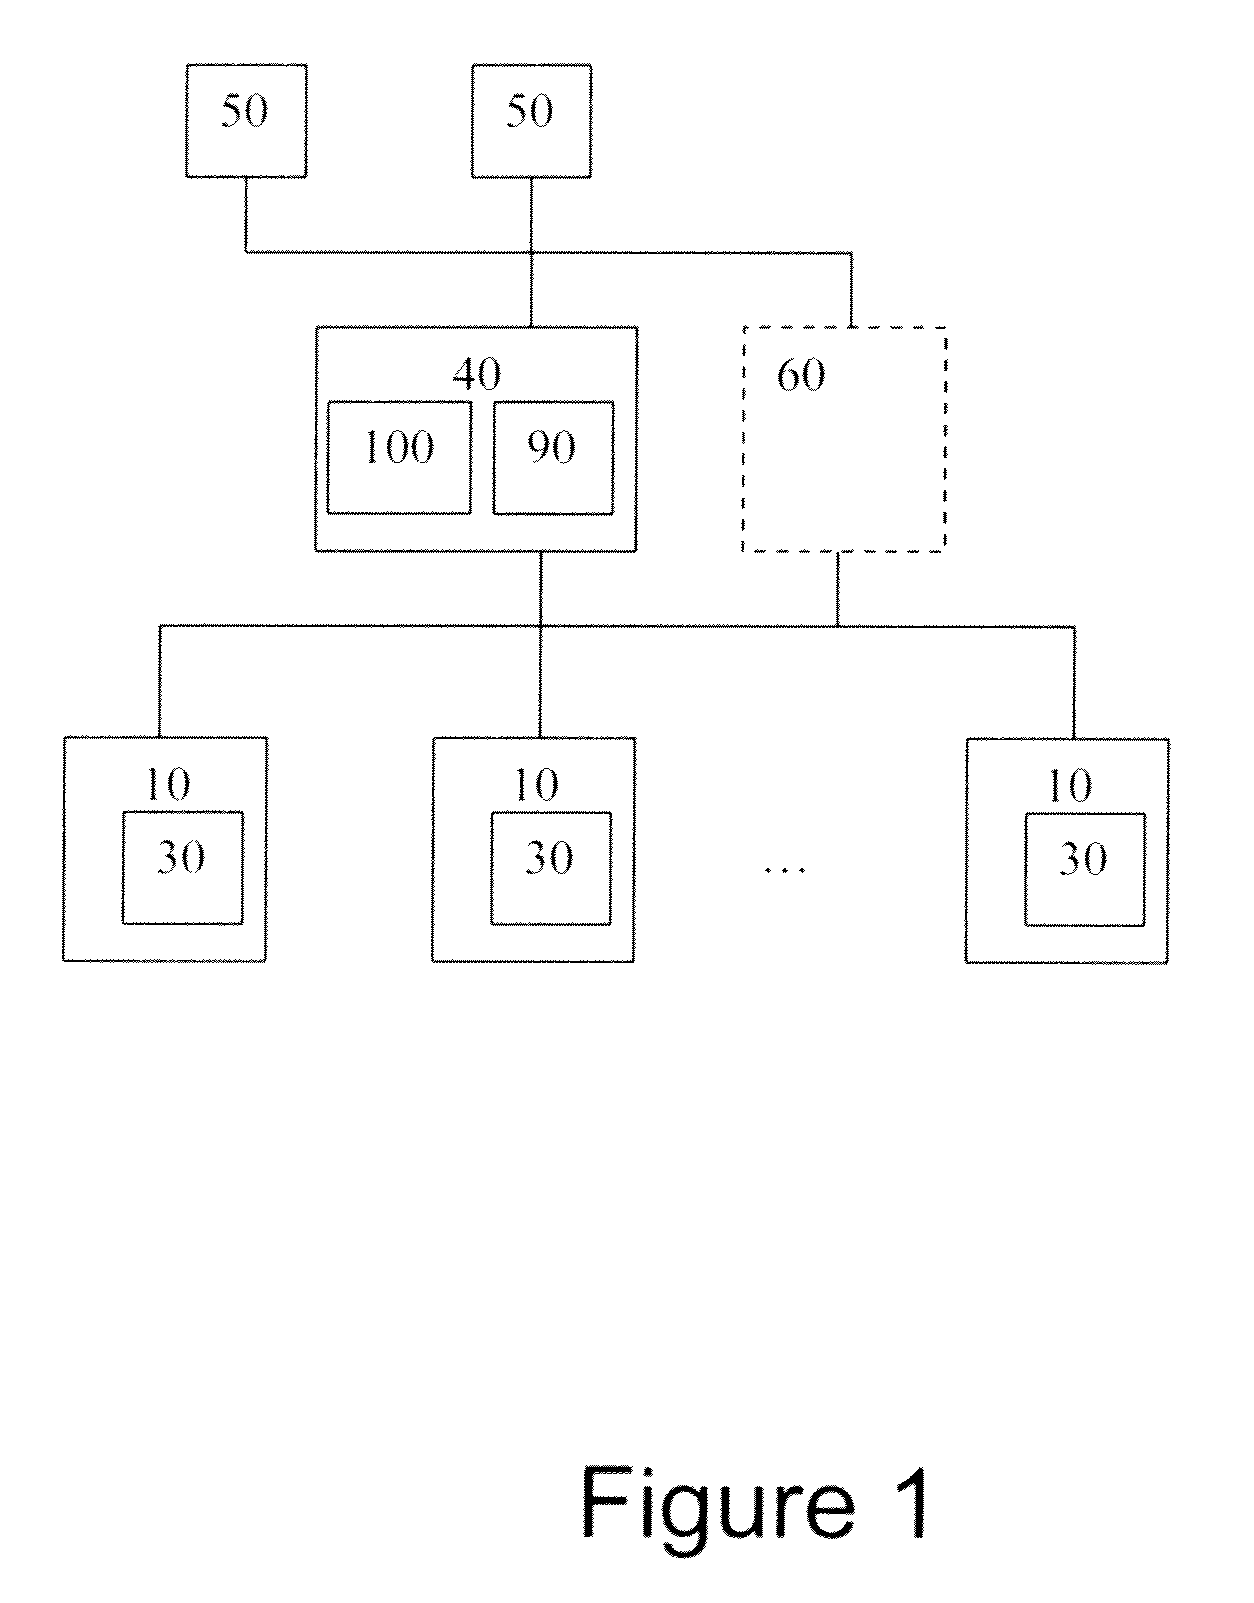 Automated method for identifying and repairing logical data discrepancies between database replicas in a database cluster